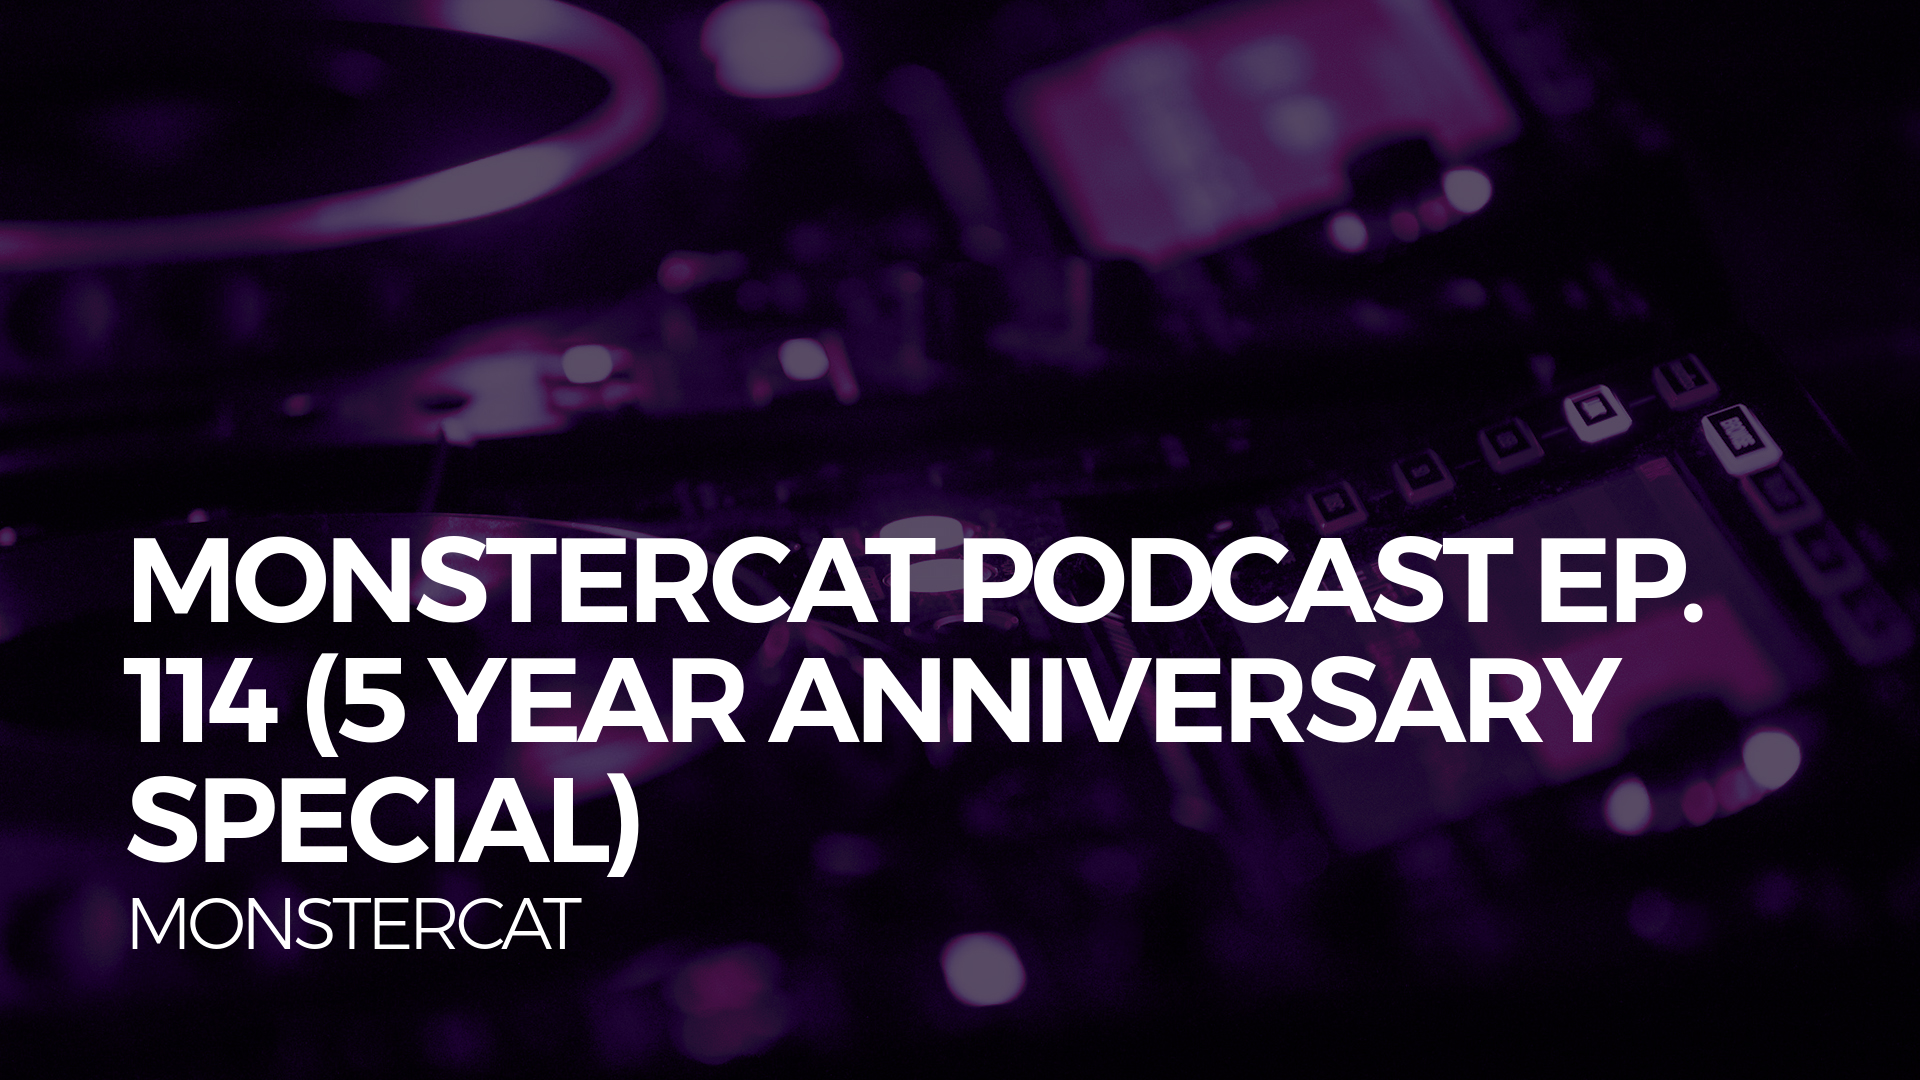 Monstercat Podcast Ep. 114 (5 Year Anniversary Special)